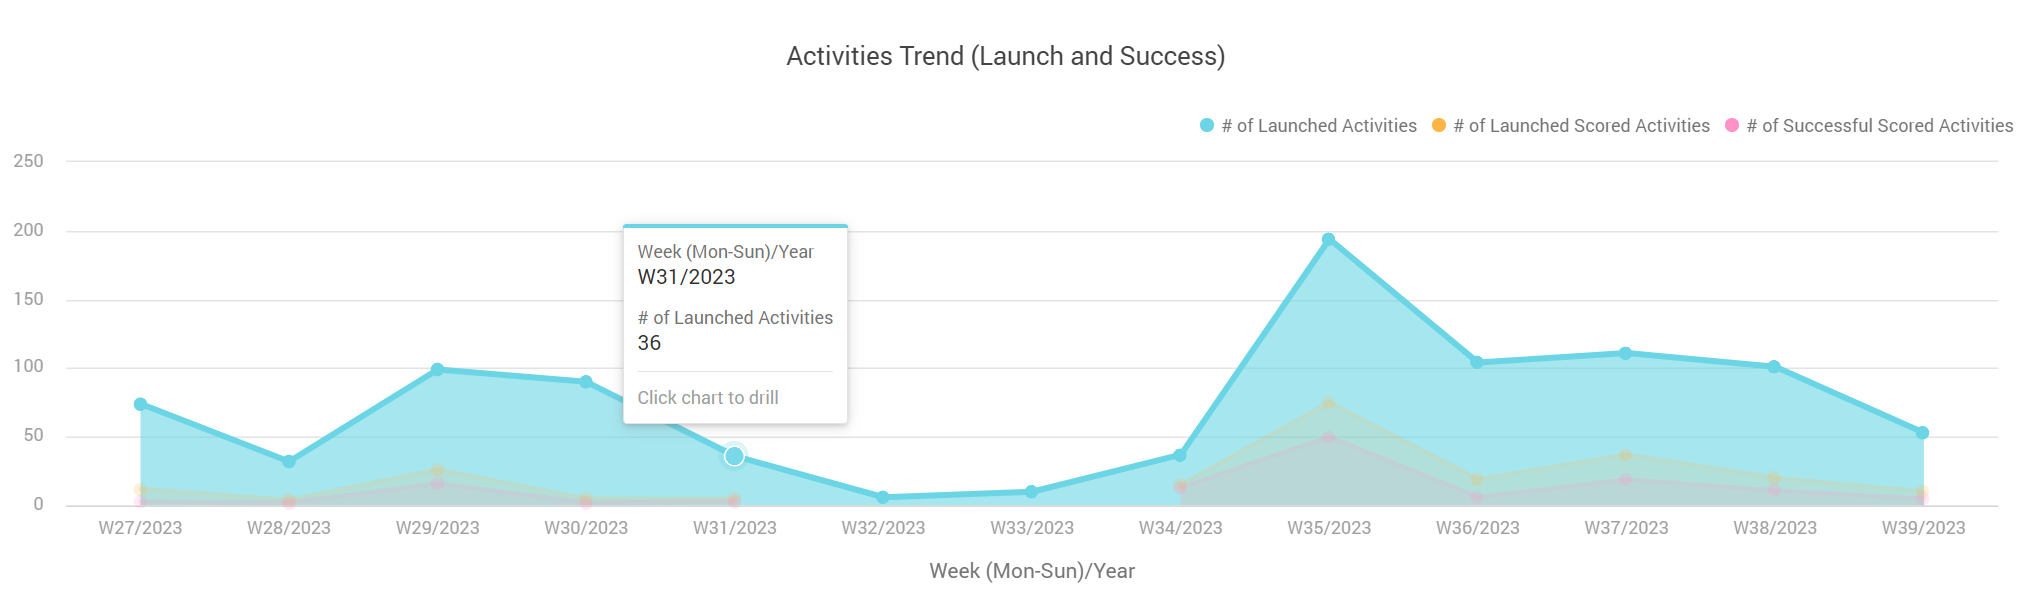 Activities trend (launch and success).png